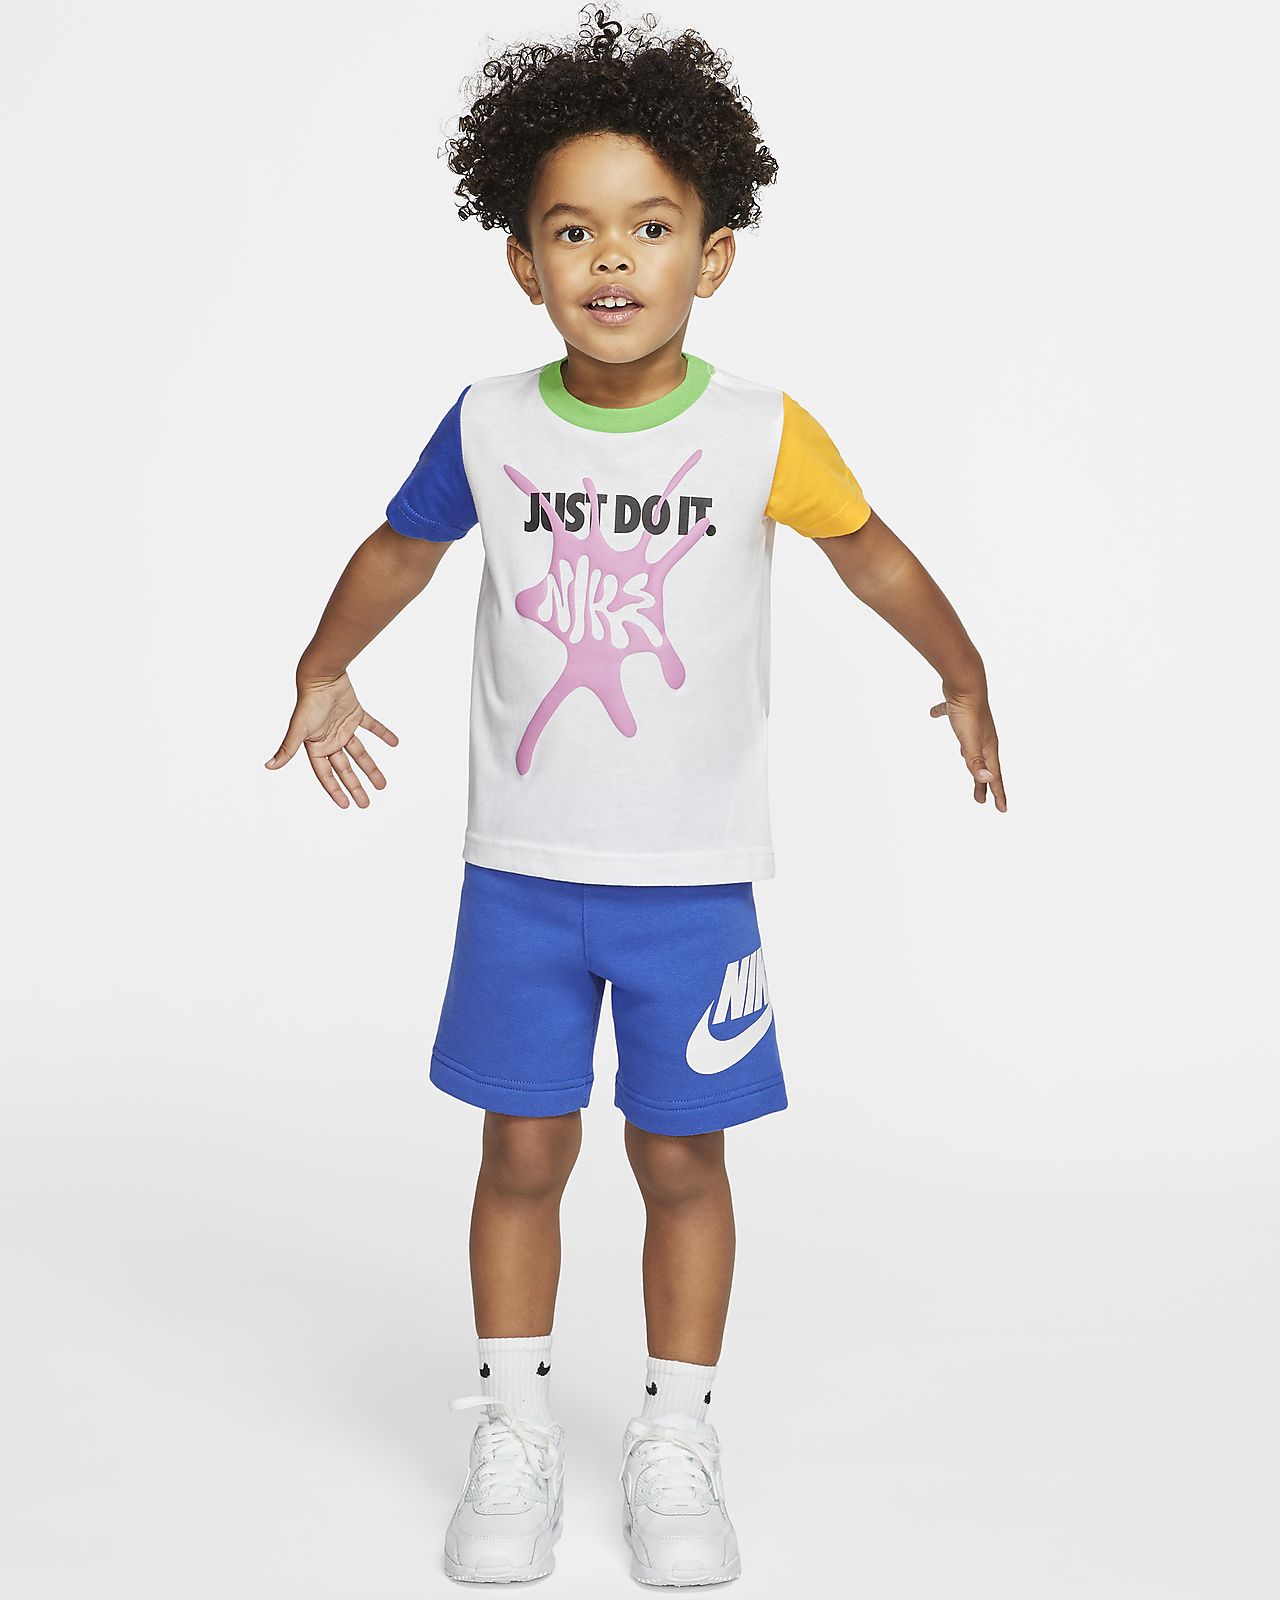 nike clothes for toddlers boy